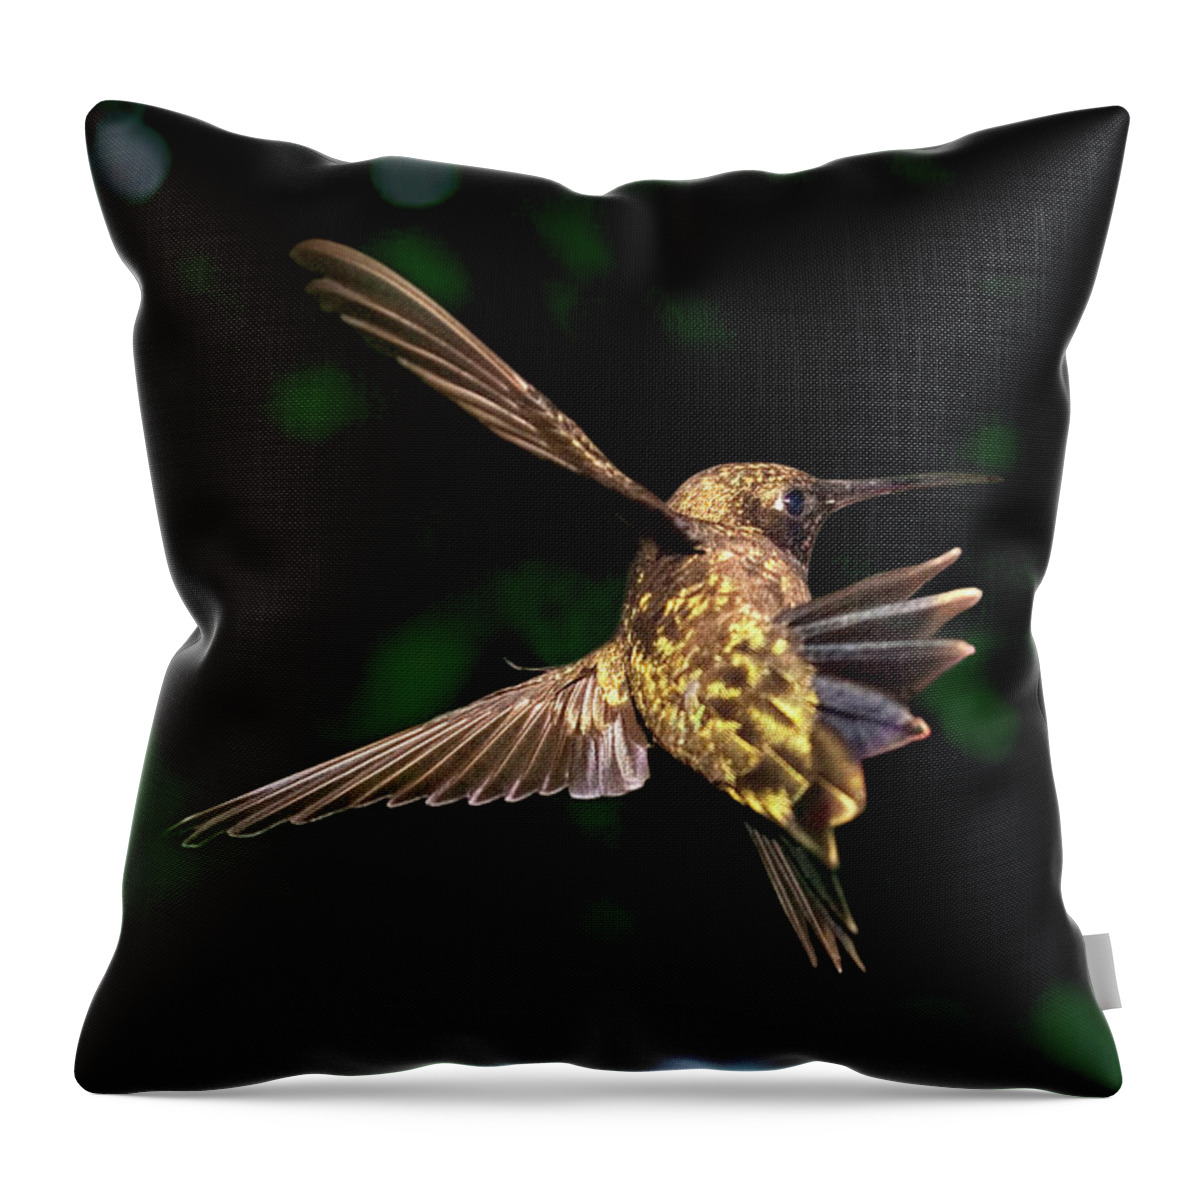 Hummingbird Throw Pillow featuring the photograph Hummingbird Taking Off by Abram House